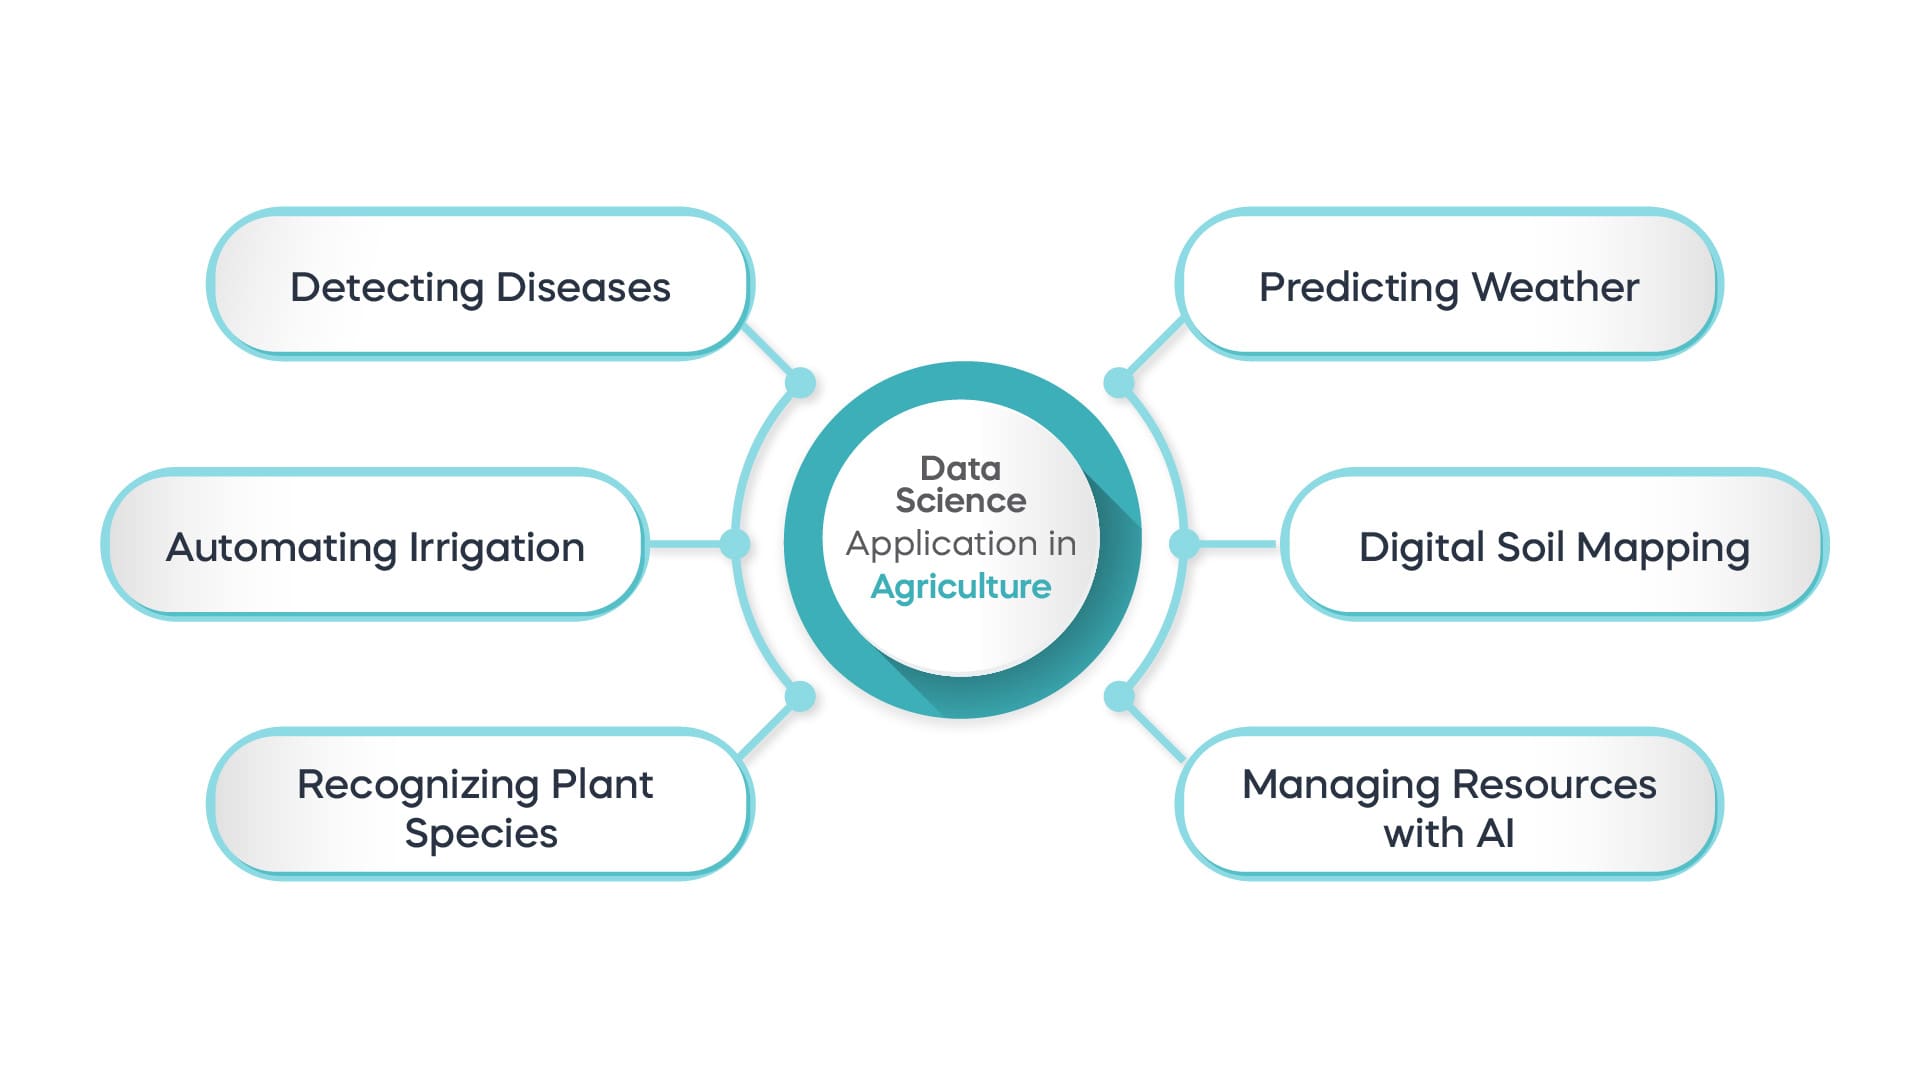 A mindmap showing the different applications of data science in agriculture - detecting diseases, predicting the weather, digital soil mapping, managing resources with AI, recognizing plant species, and automating irrigation.